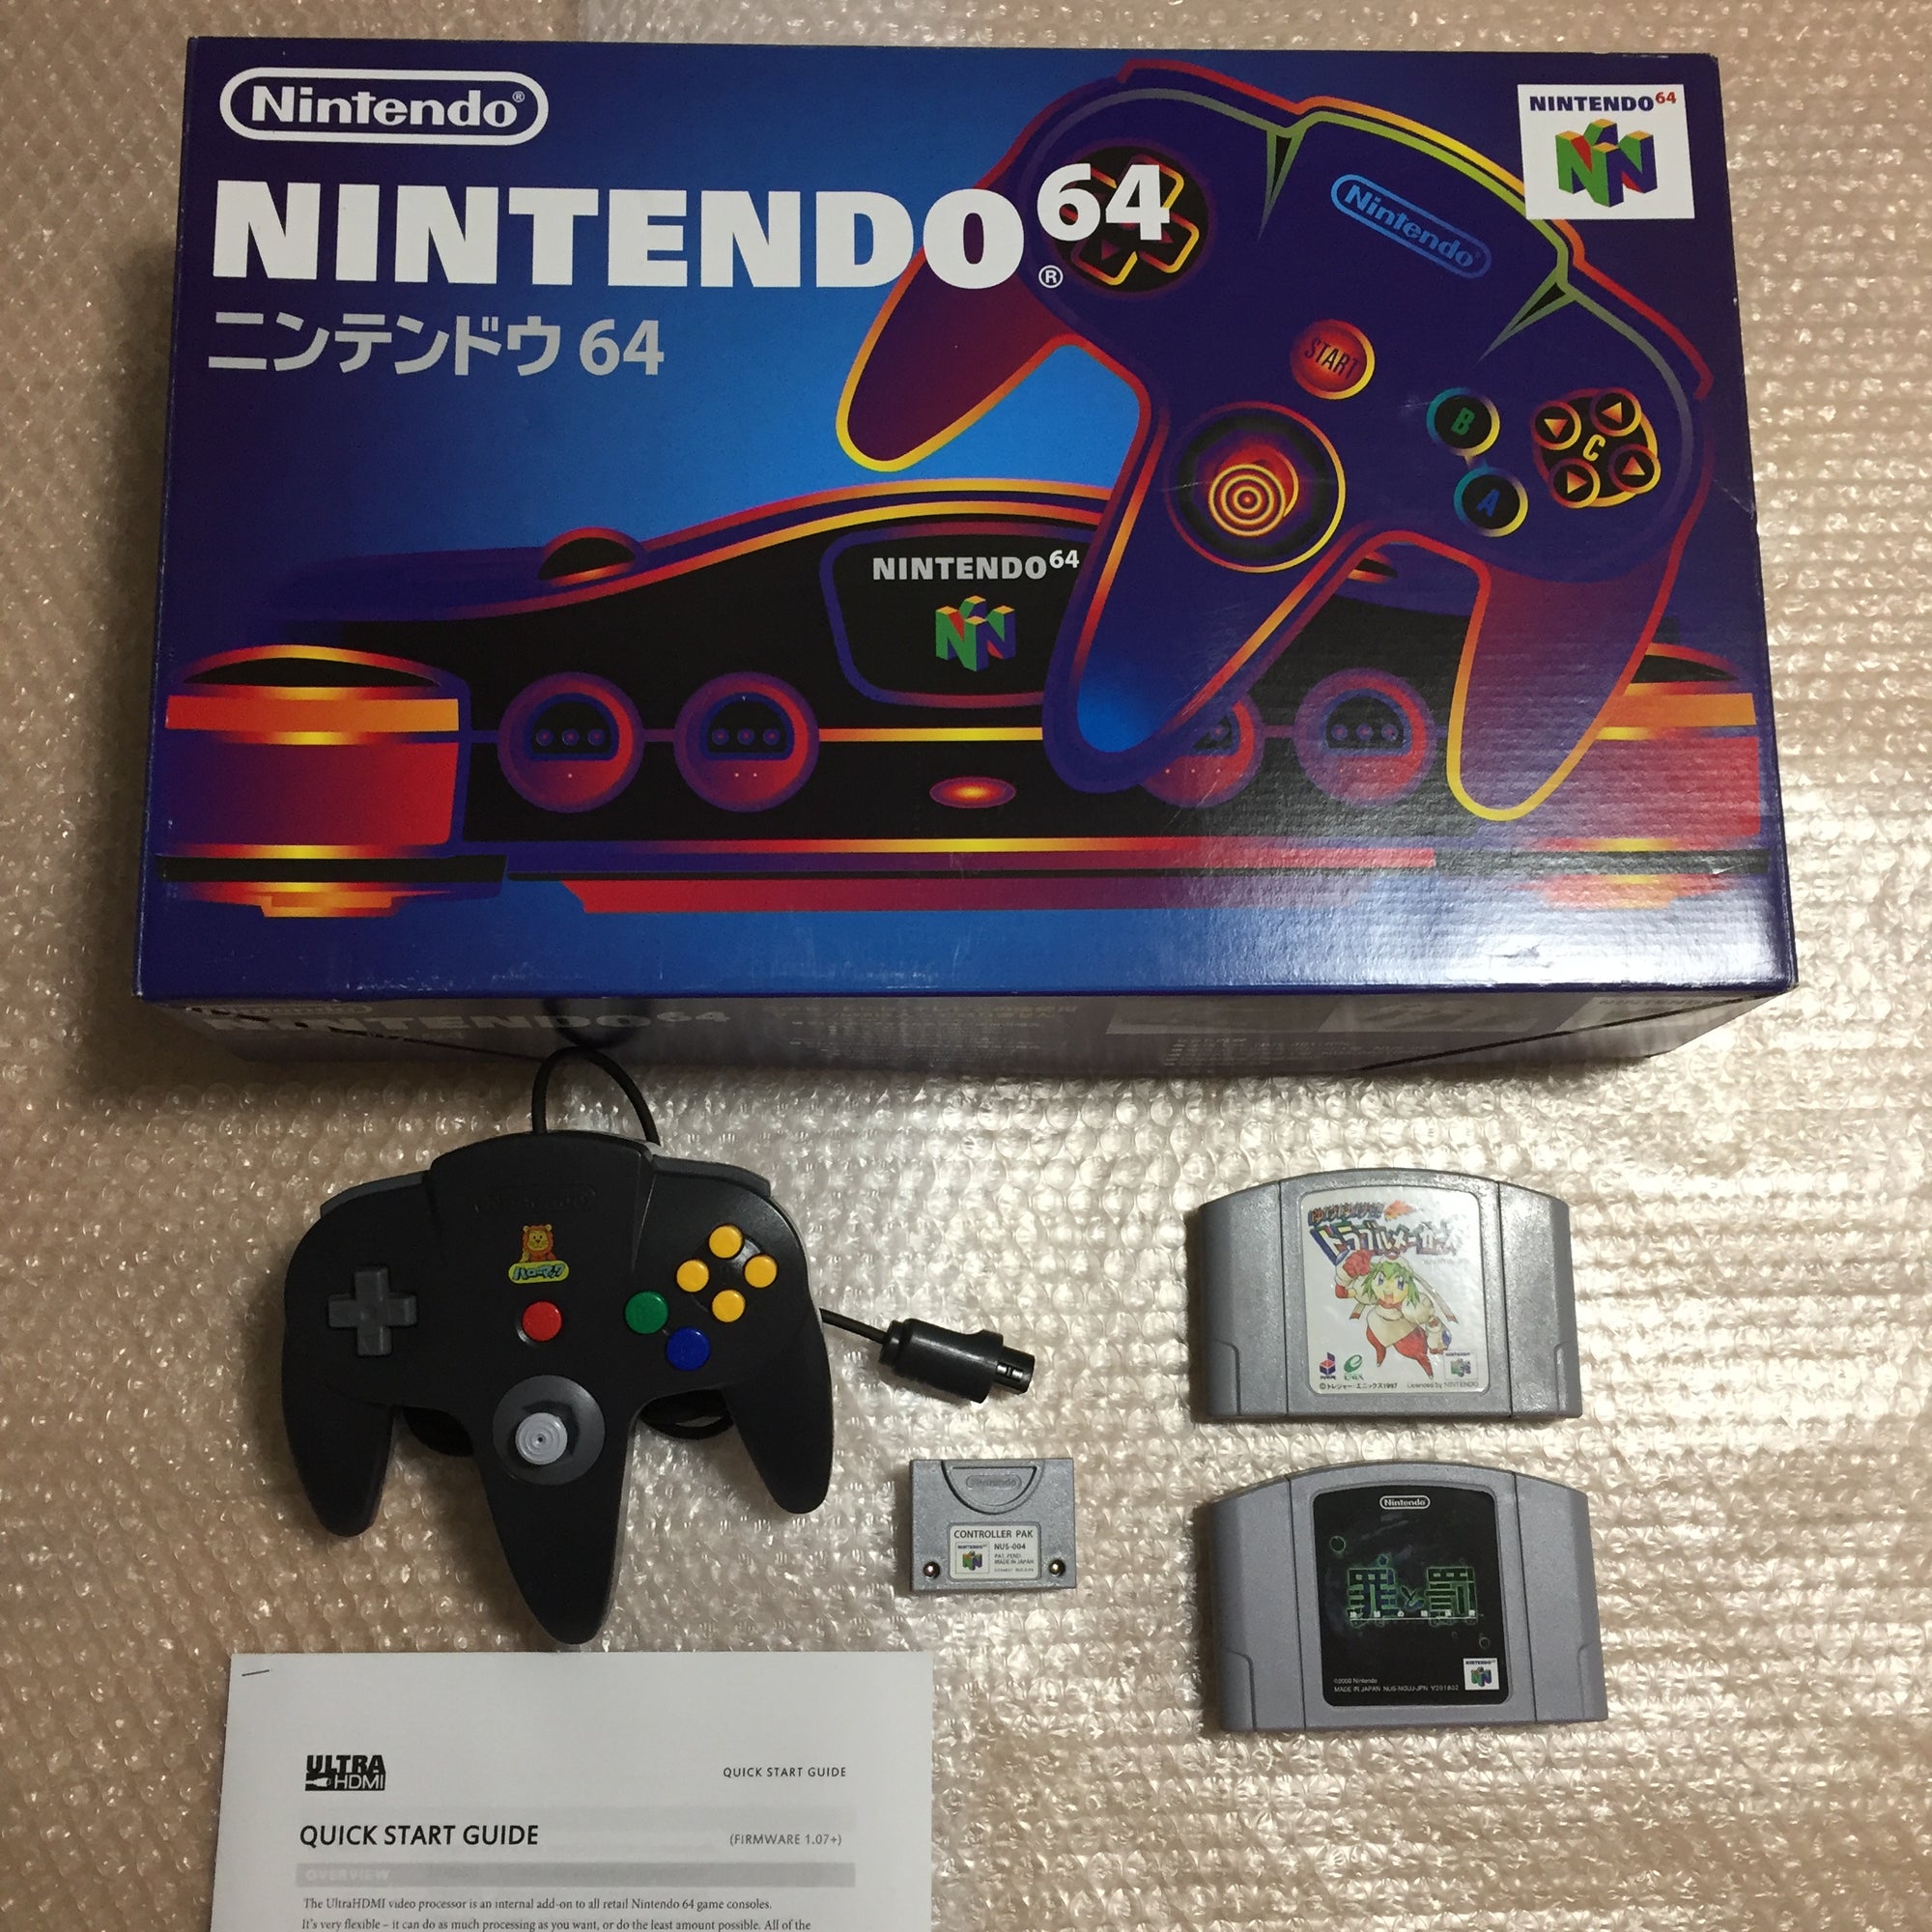 Nintendo 64 in box set with ULTRA HDMI kit - compatible with JP and US games - "Hello Mac" set